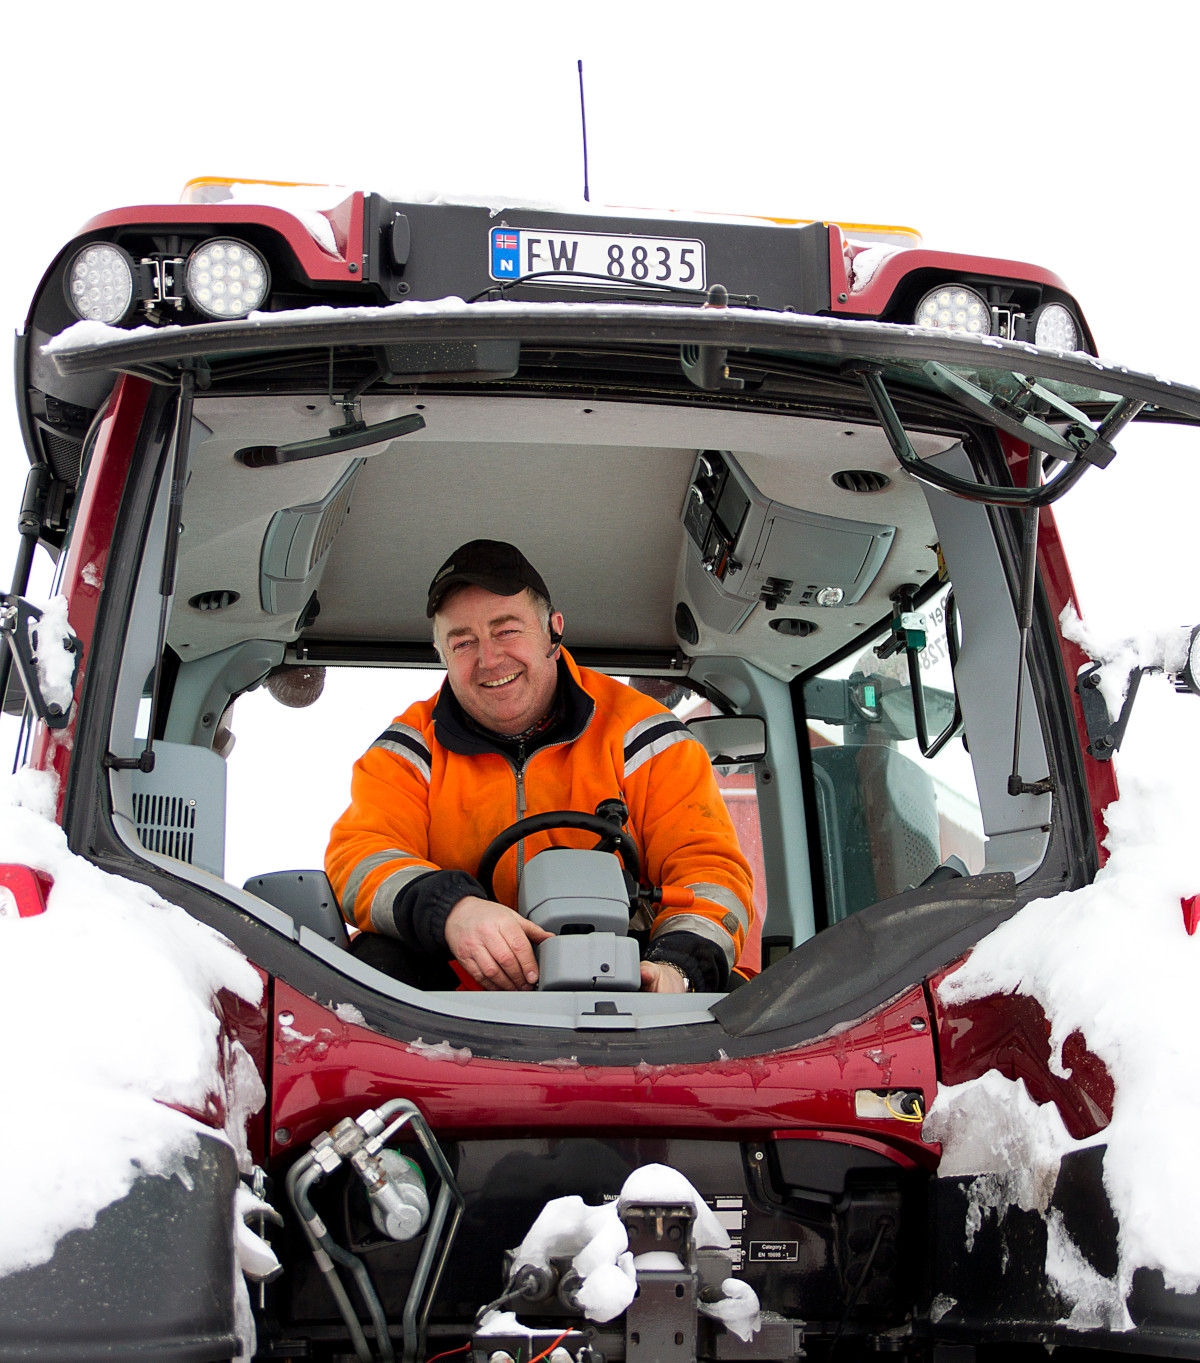 TwinTrac is great to have when Per Kristian Kylstad is opening snowed in roads in the winter. He then often backs up with the snowblower so he can see better.